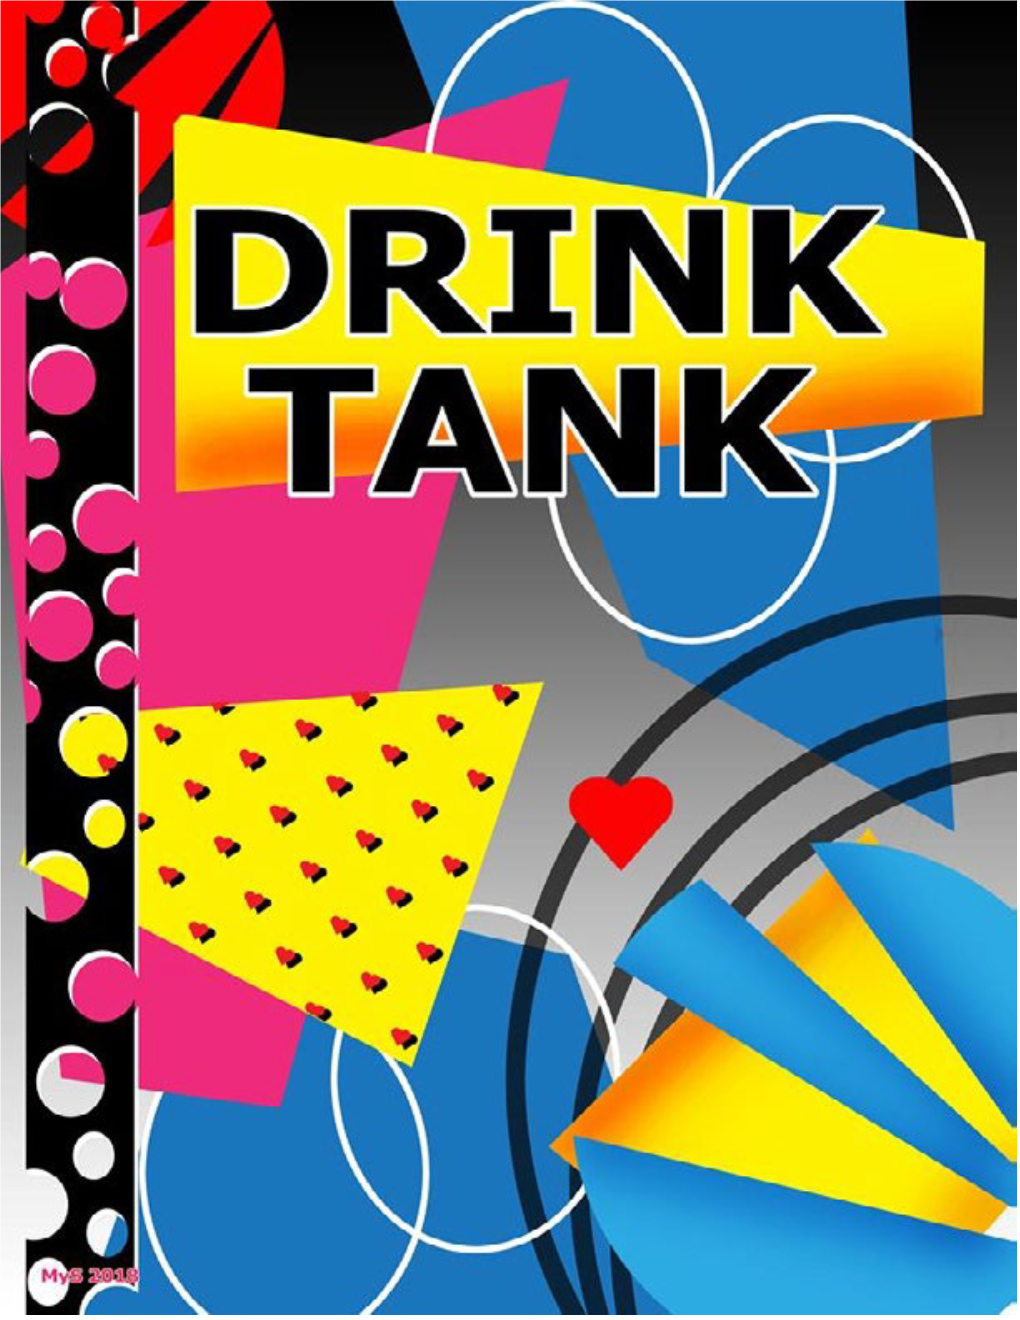 The Drink Tank? Because of Good Morning Mr